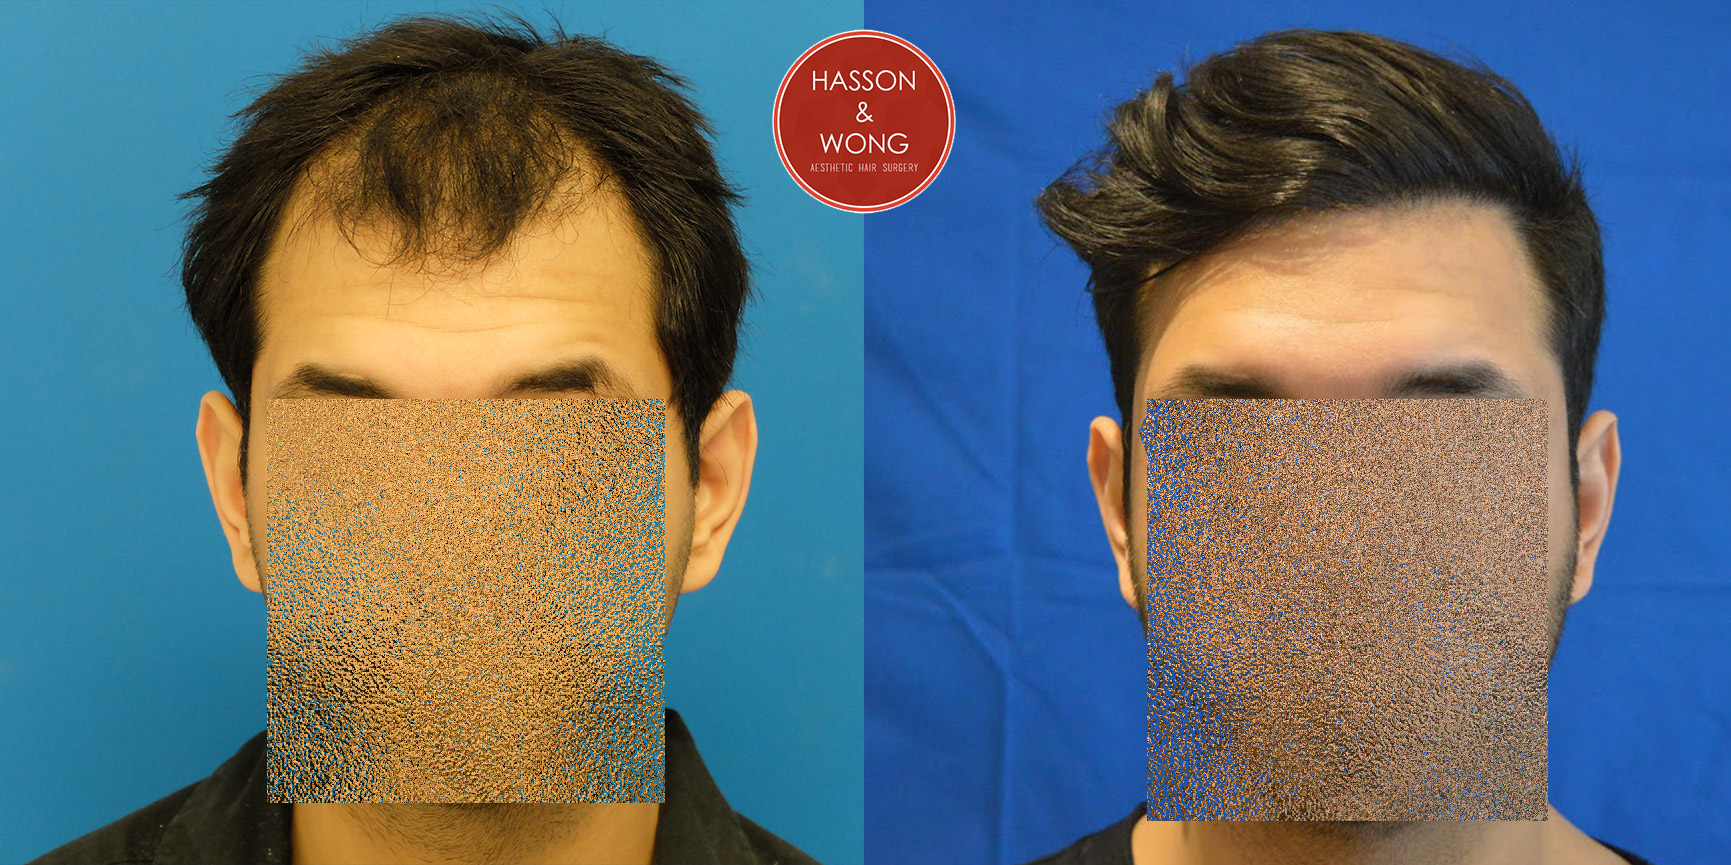 hair-transplant-before-and-after-dr-hasson--1.jpg